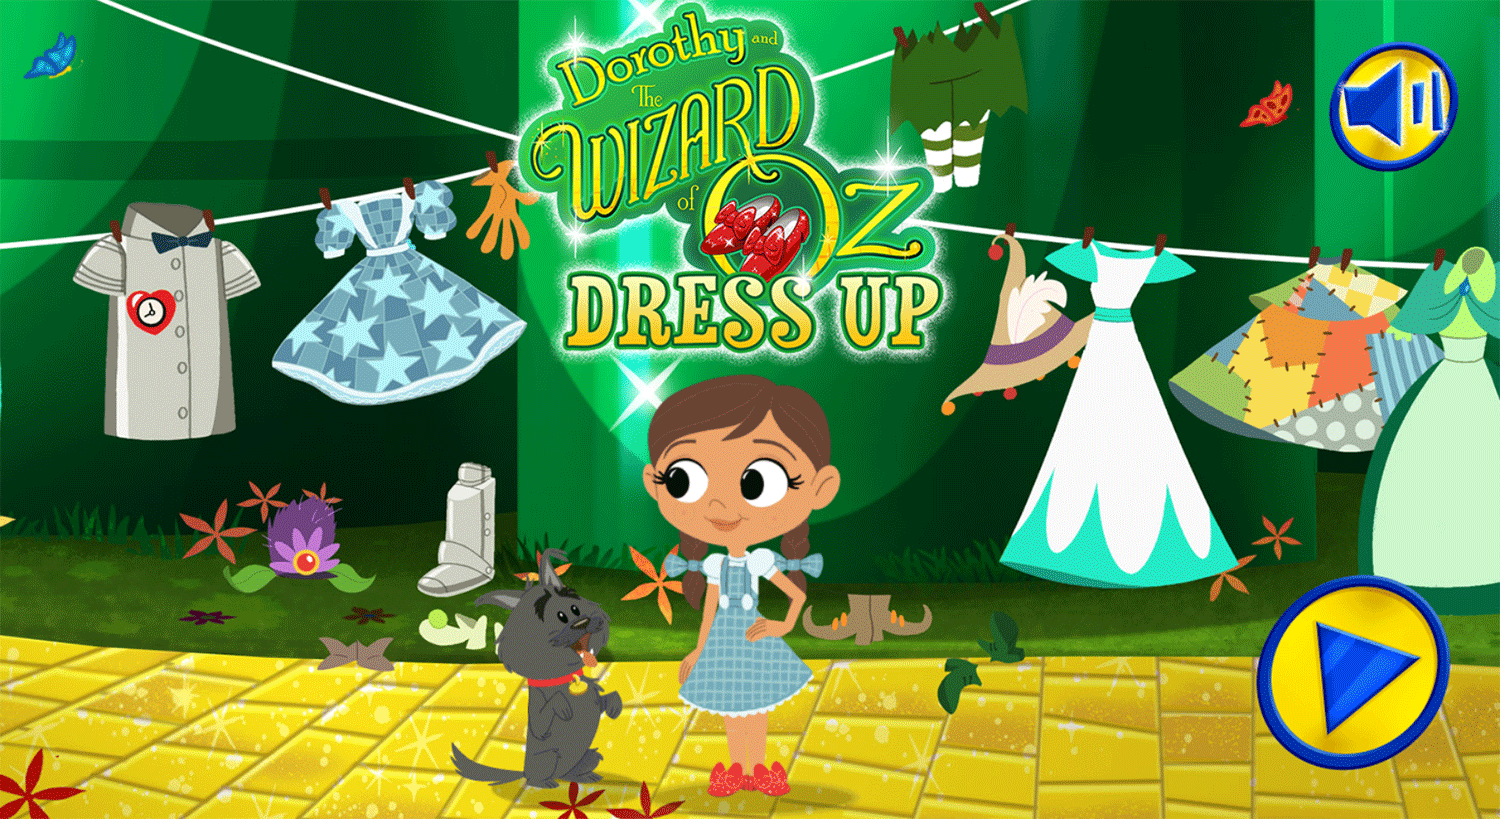 Dorothy and the Wizard of Oz Dress Up Game Welcome Screen Screenshot.